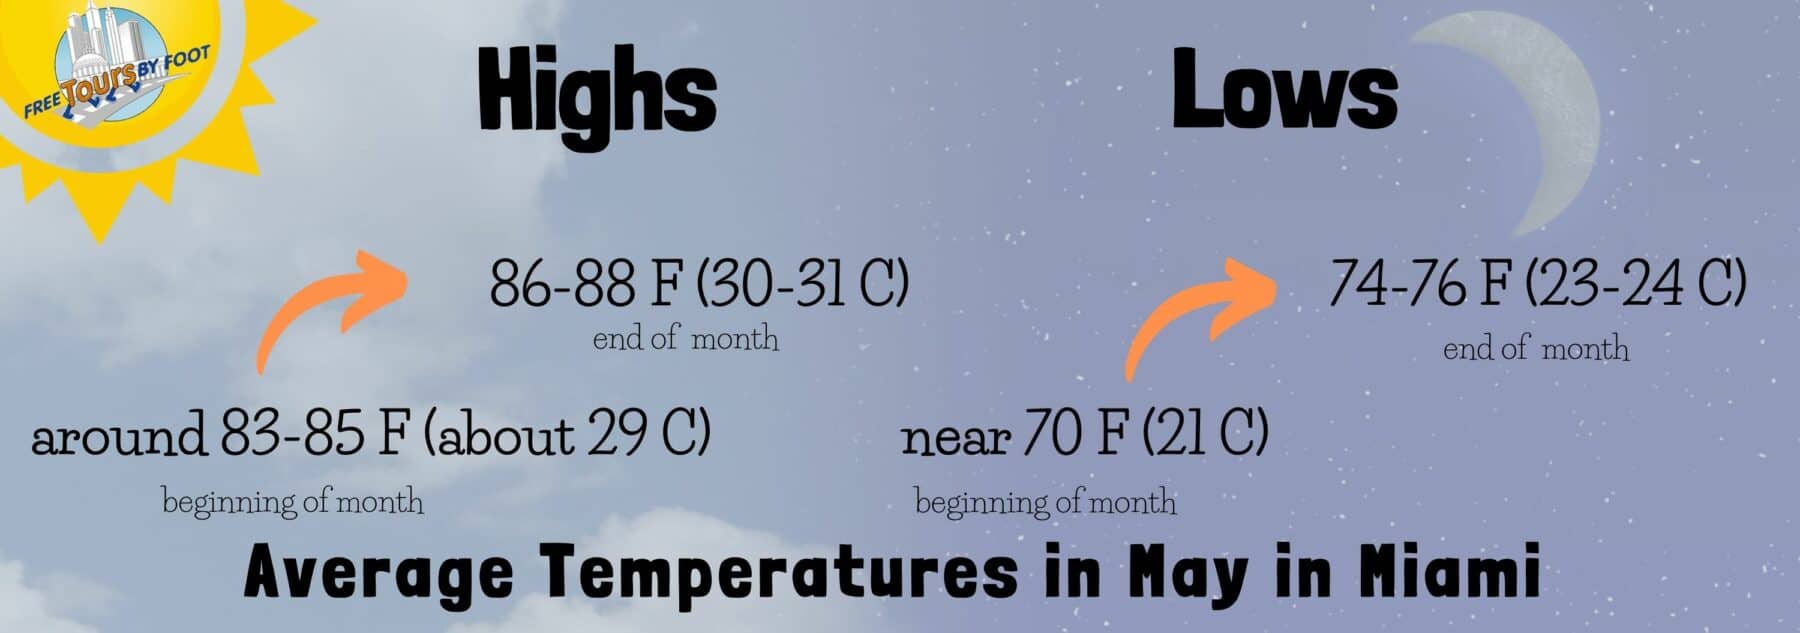 Average Temperatures in May in Miami - SaveSuperdry